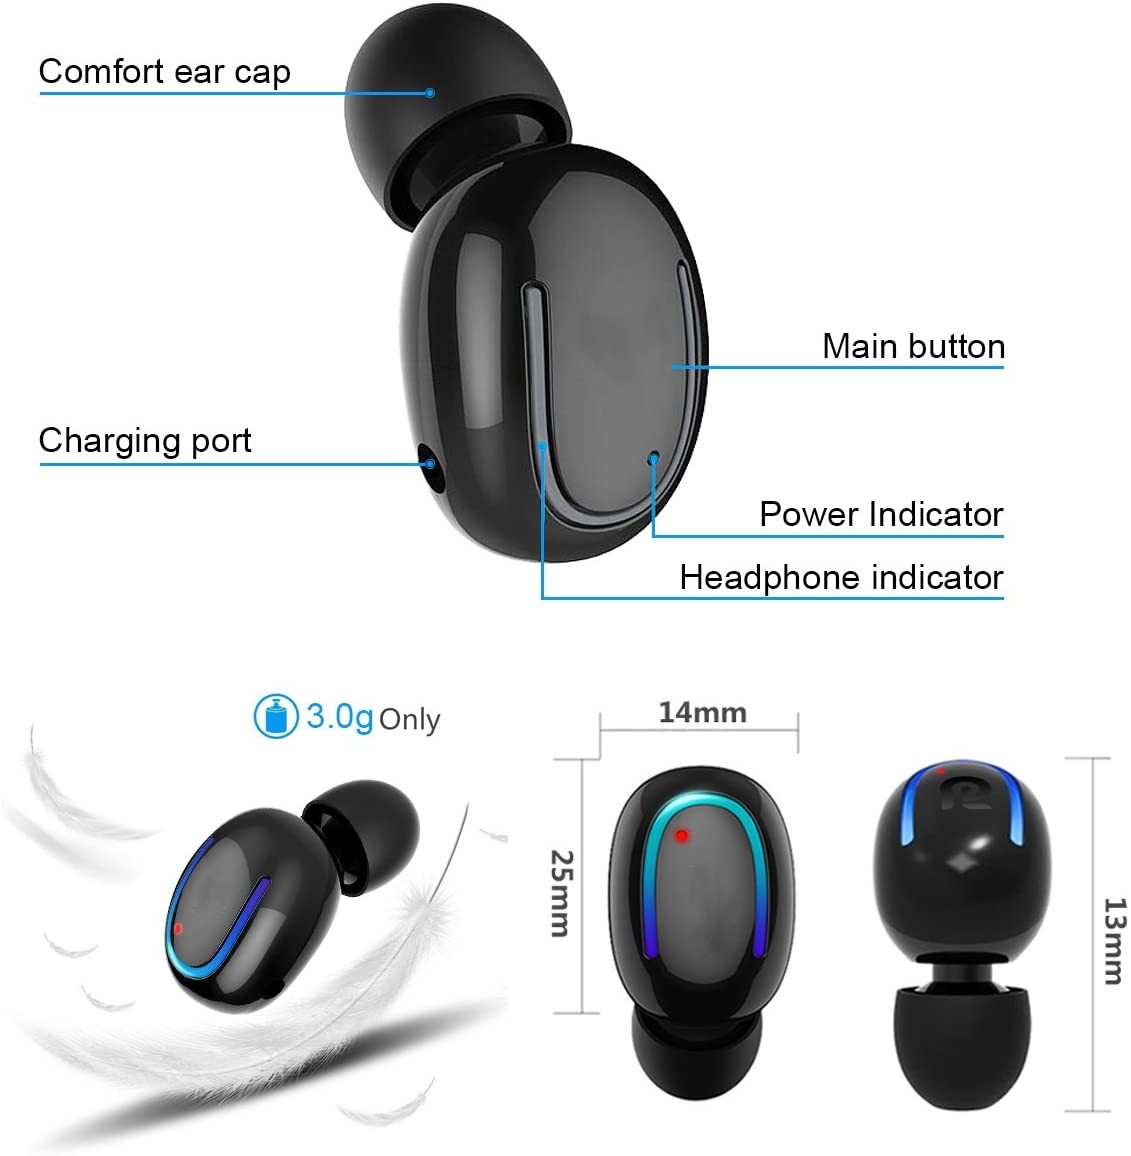 Bluetooth Earpiece Wireless Headphone Mini Invisible Earbud, 6 Hrs Playtime Tiny Smallest Headset Single Car Earphone with Mic for iPhone Samsung Galaxy (1 Piece) - image 4 of 7